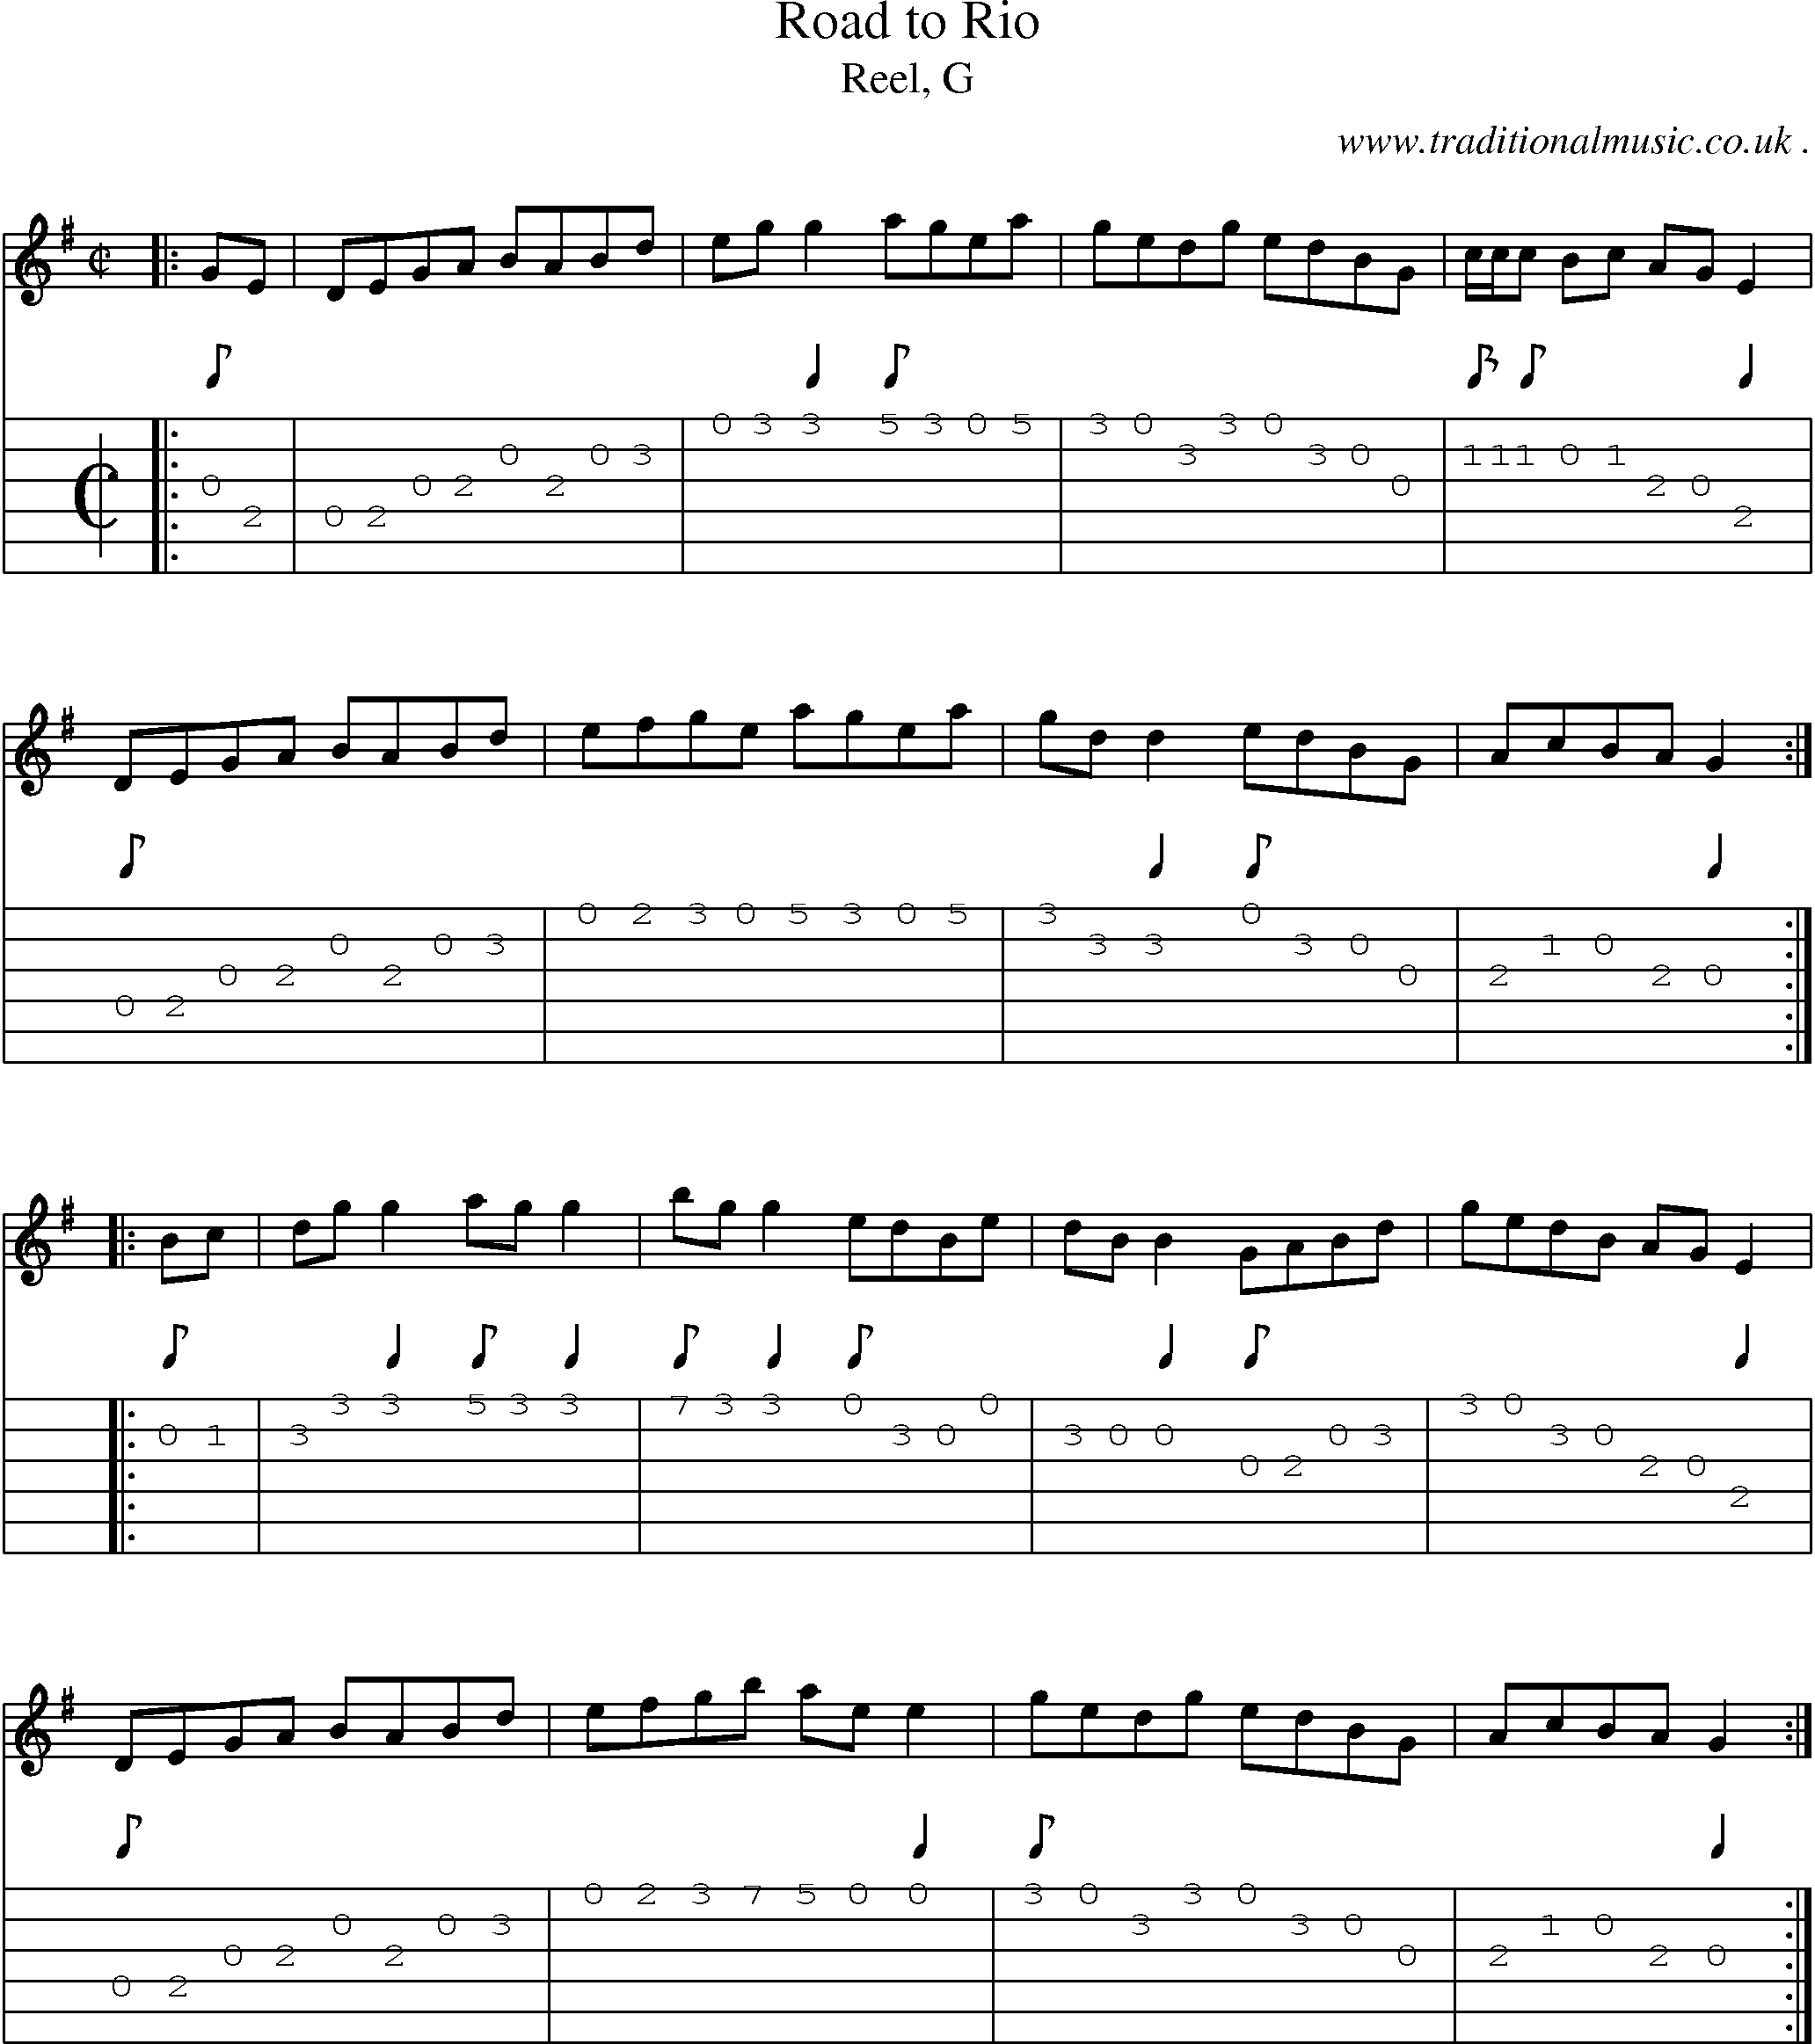 Sheet-music  score, Chords and Guitar Tabs for Road To Rio